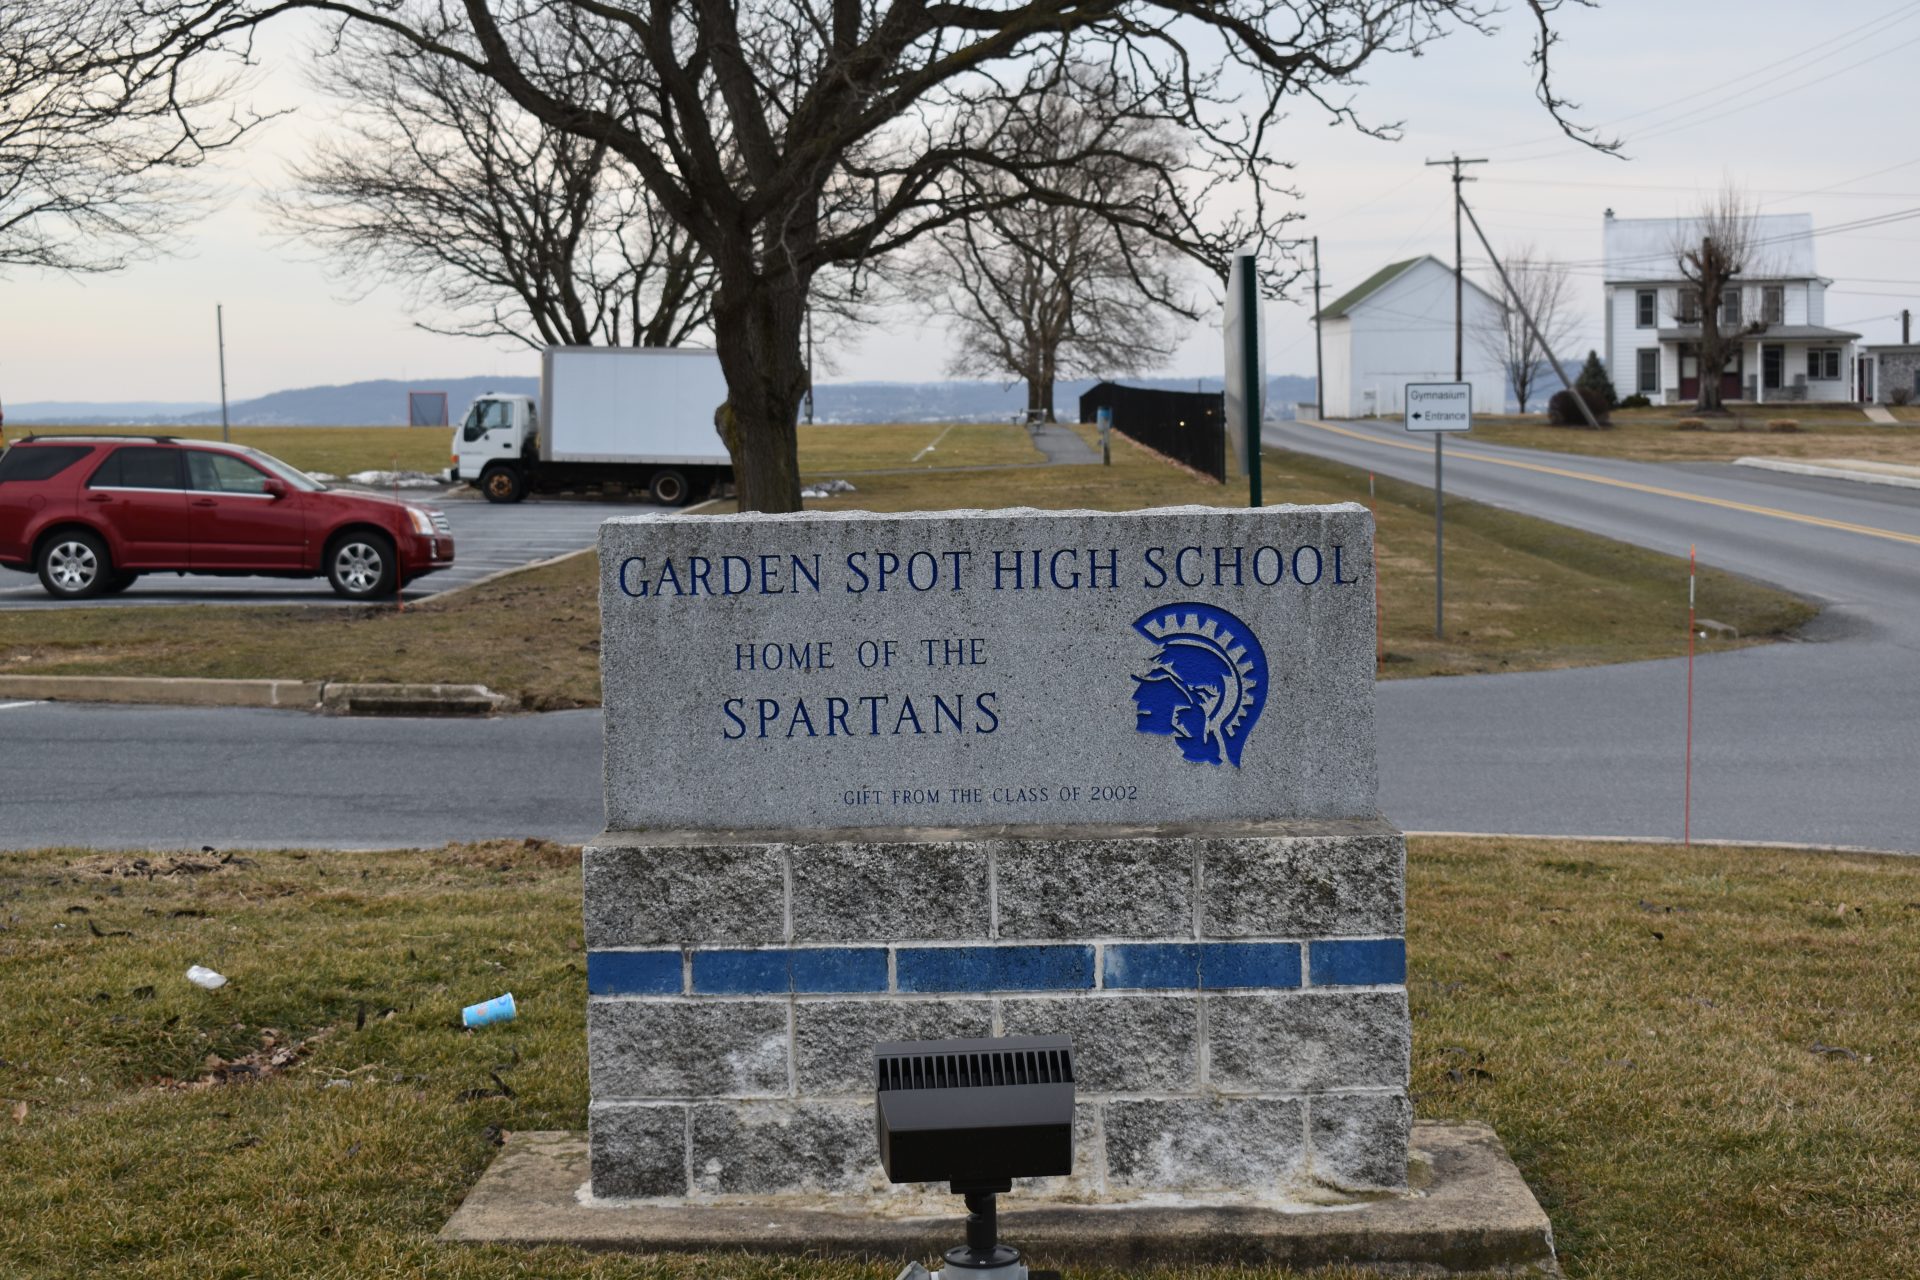 The entrance to Garden Spot High School in New Holland, Lancaster County.